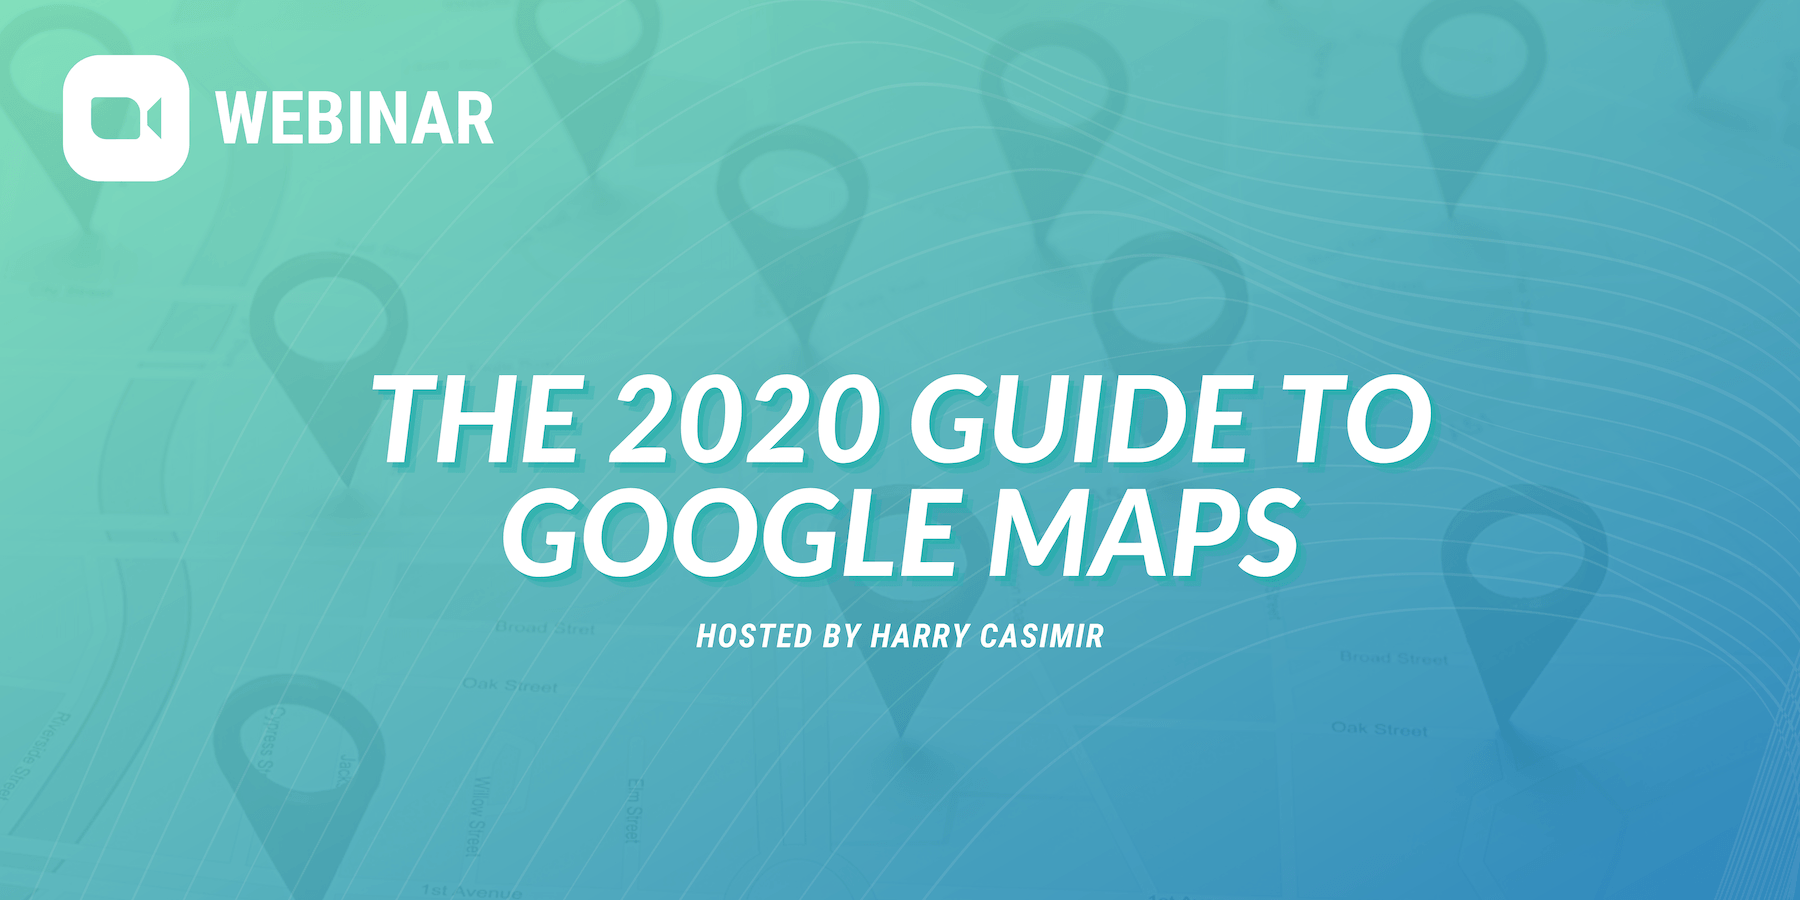 Webinar: The 2020 guide to Google Maps, hosted by Harry Casimir